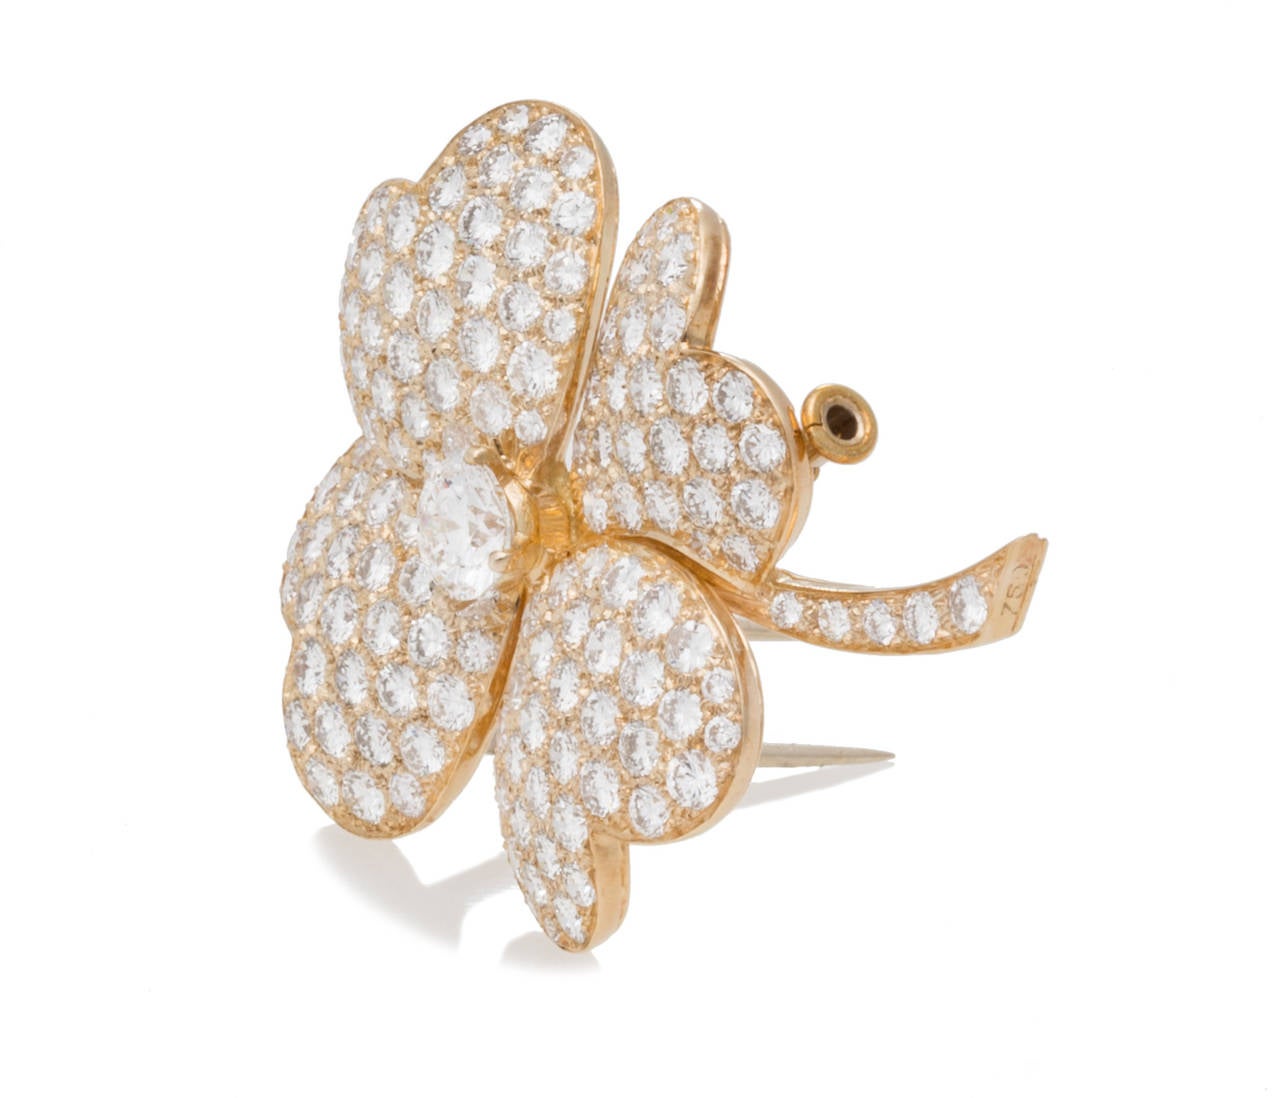 Classic Van Cleef & Arpels VCA Diamond Pave Very Large Model Cosmos Clip in 18K Yellow Gold with approx. .50ct round diamond center stone, Length 1.63